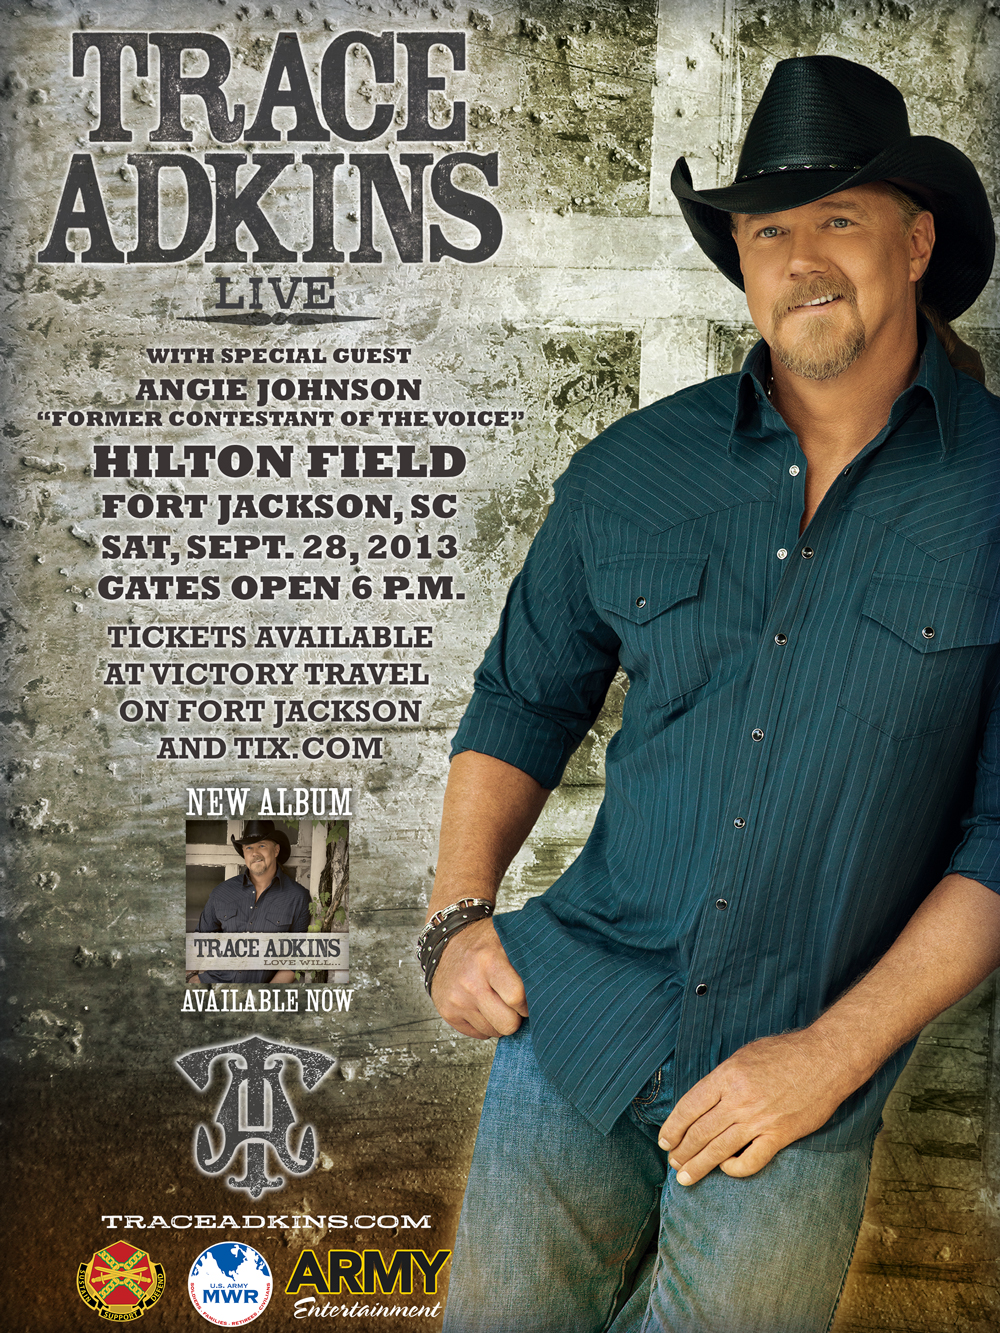 More Pictures Of Trace Adkins. trace adkins summertime. 